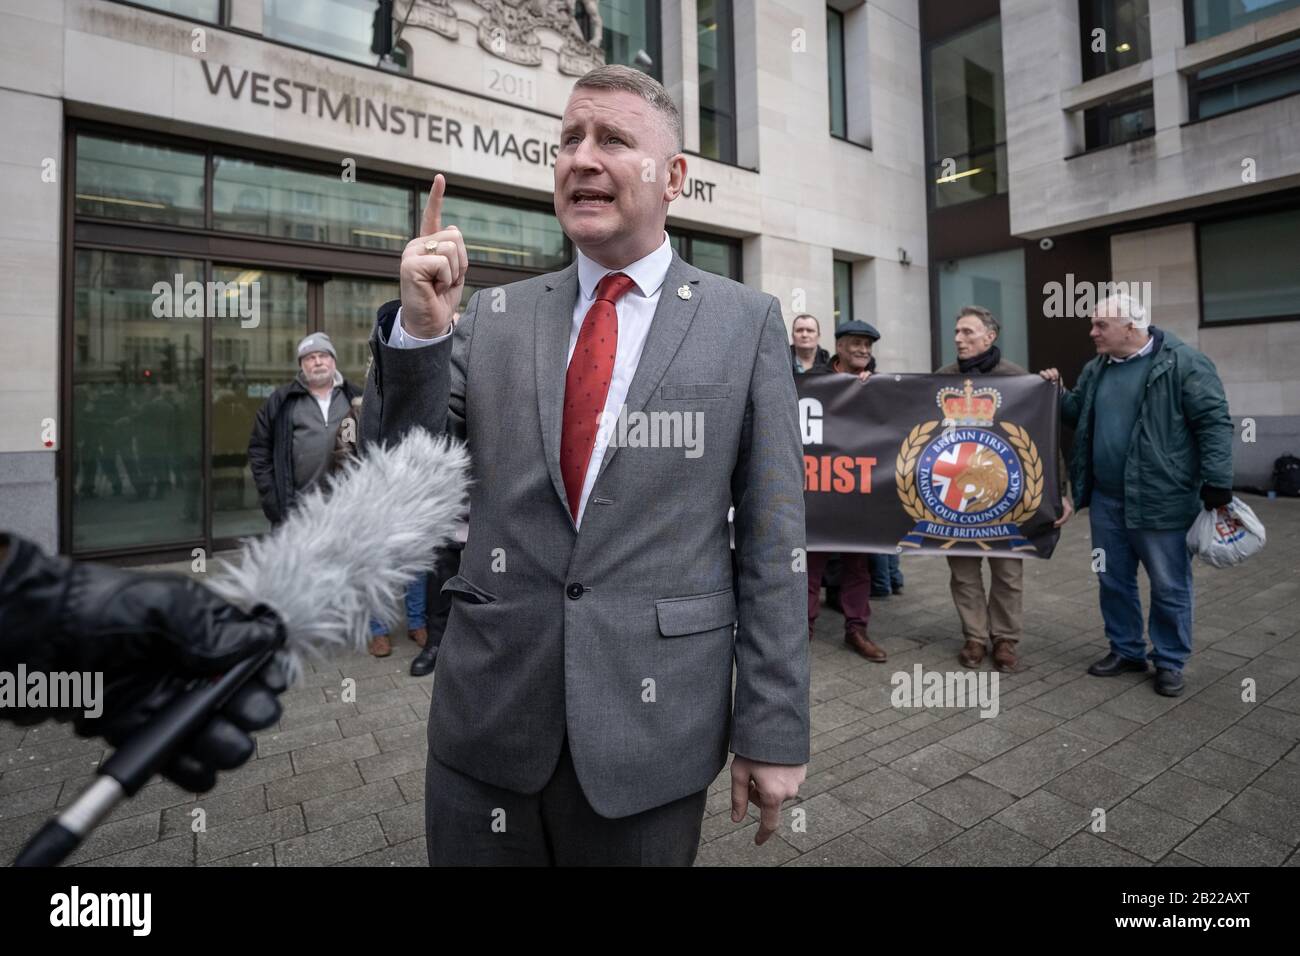 Britain First leader Paul Golding speaks to press outside Westminster Magistrates Court after being charged under Section 7 of the Terrorism Act, UK. Stock Photo